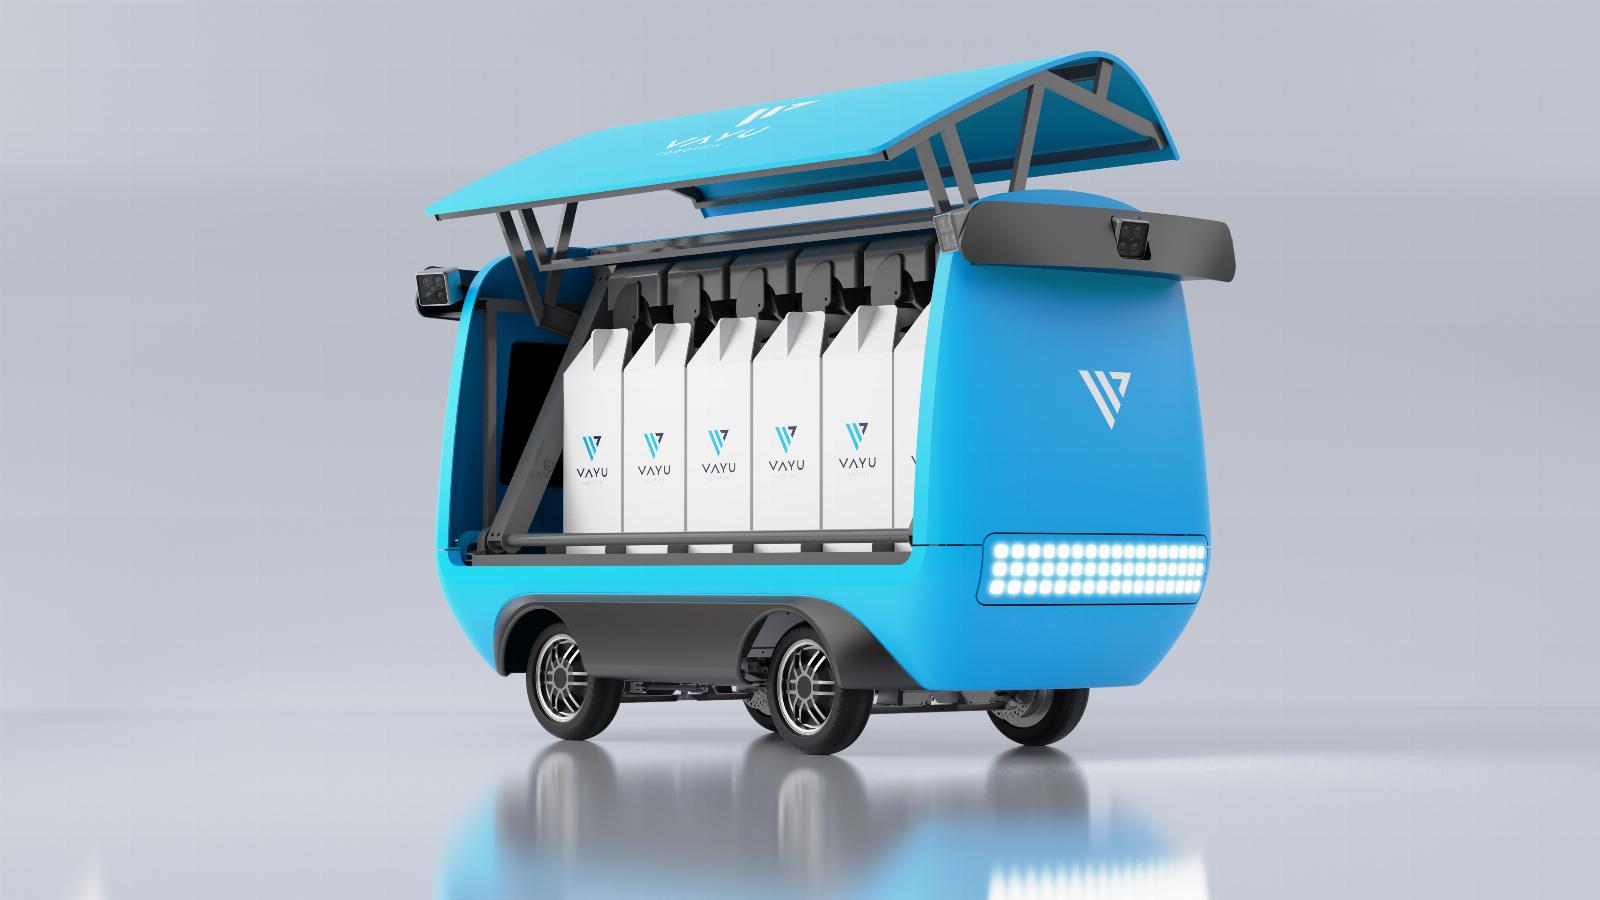 Former Velodyne CEO’s delivery robot startup is ditching LiDAR for foundation models